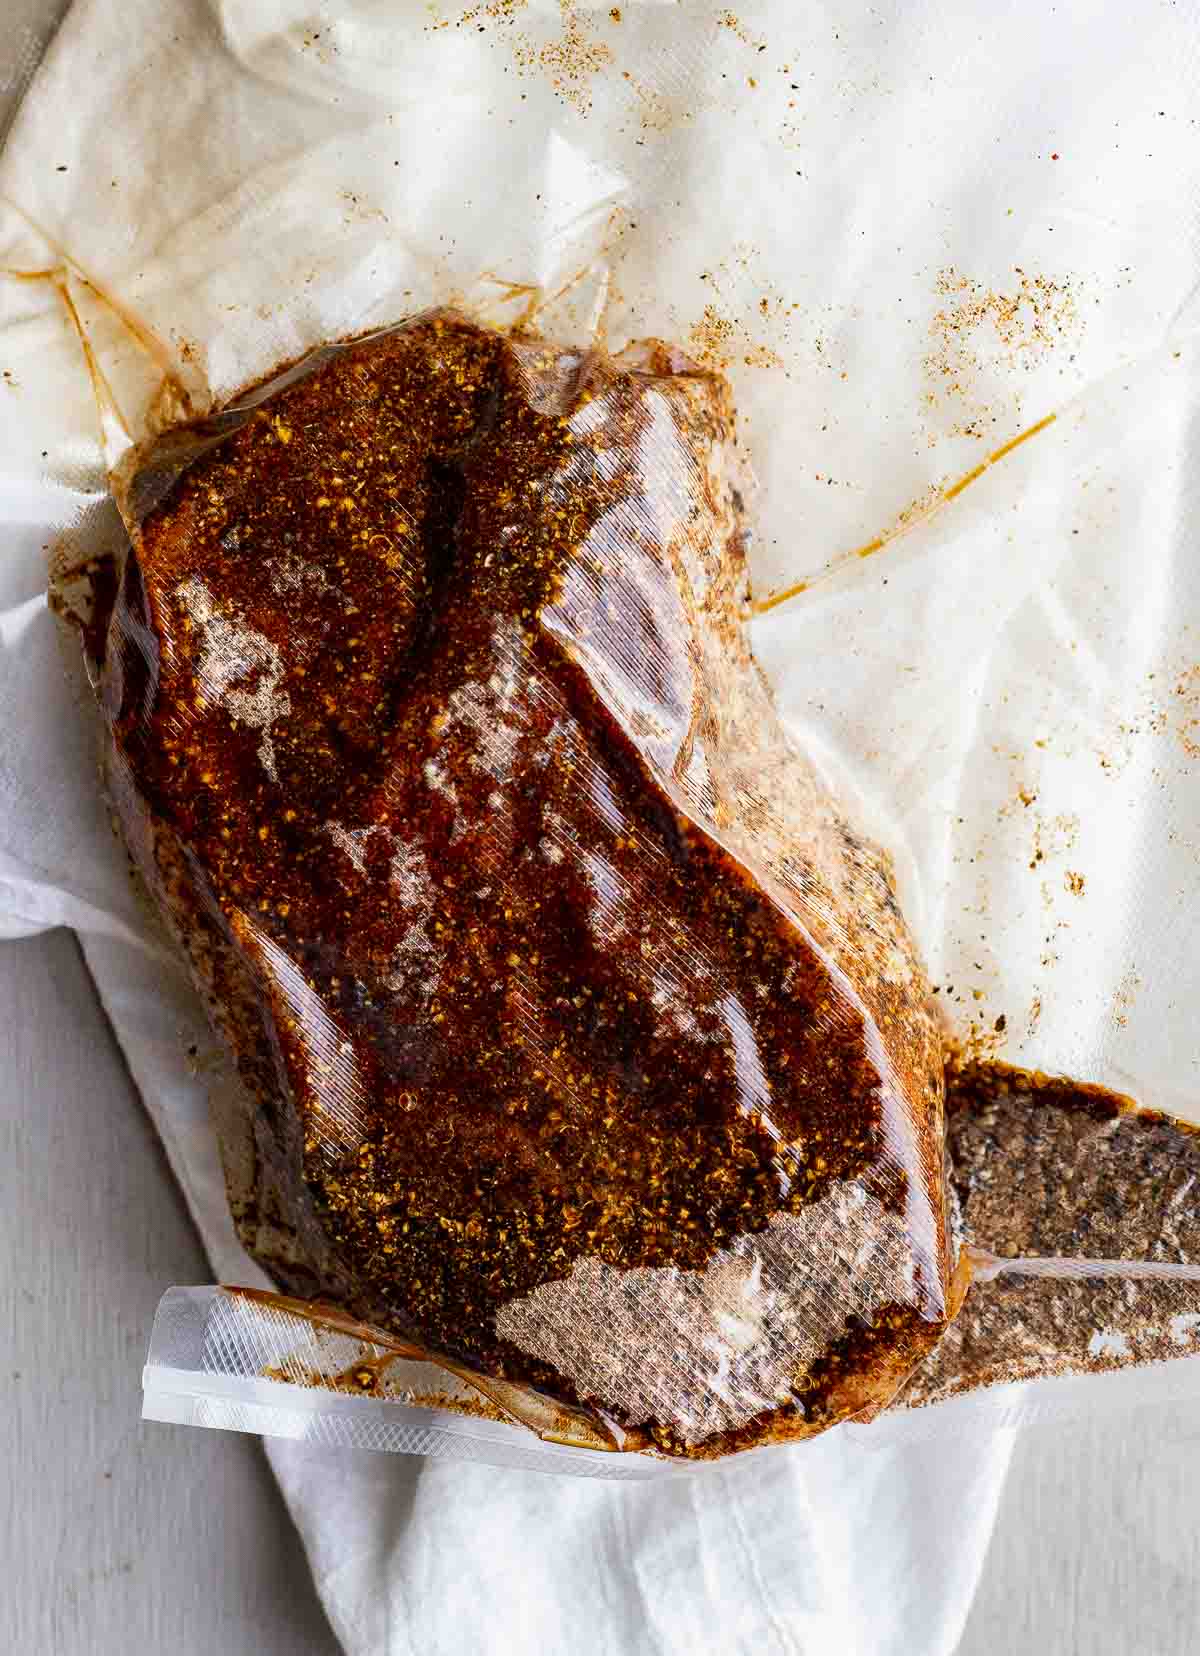 Corned beef brisket coated in spice rub and sealed in a bag.